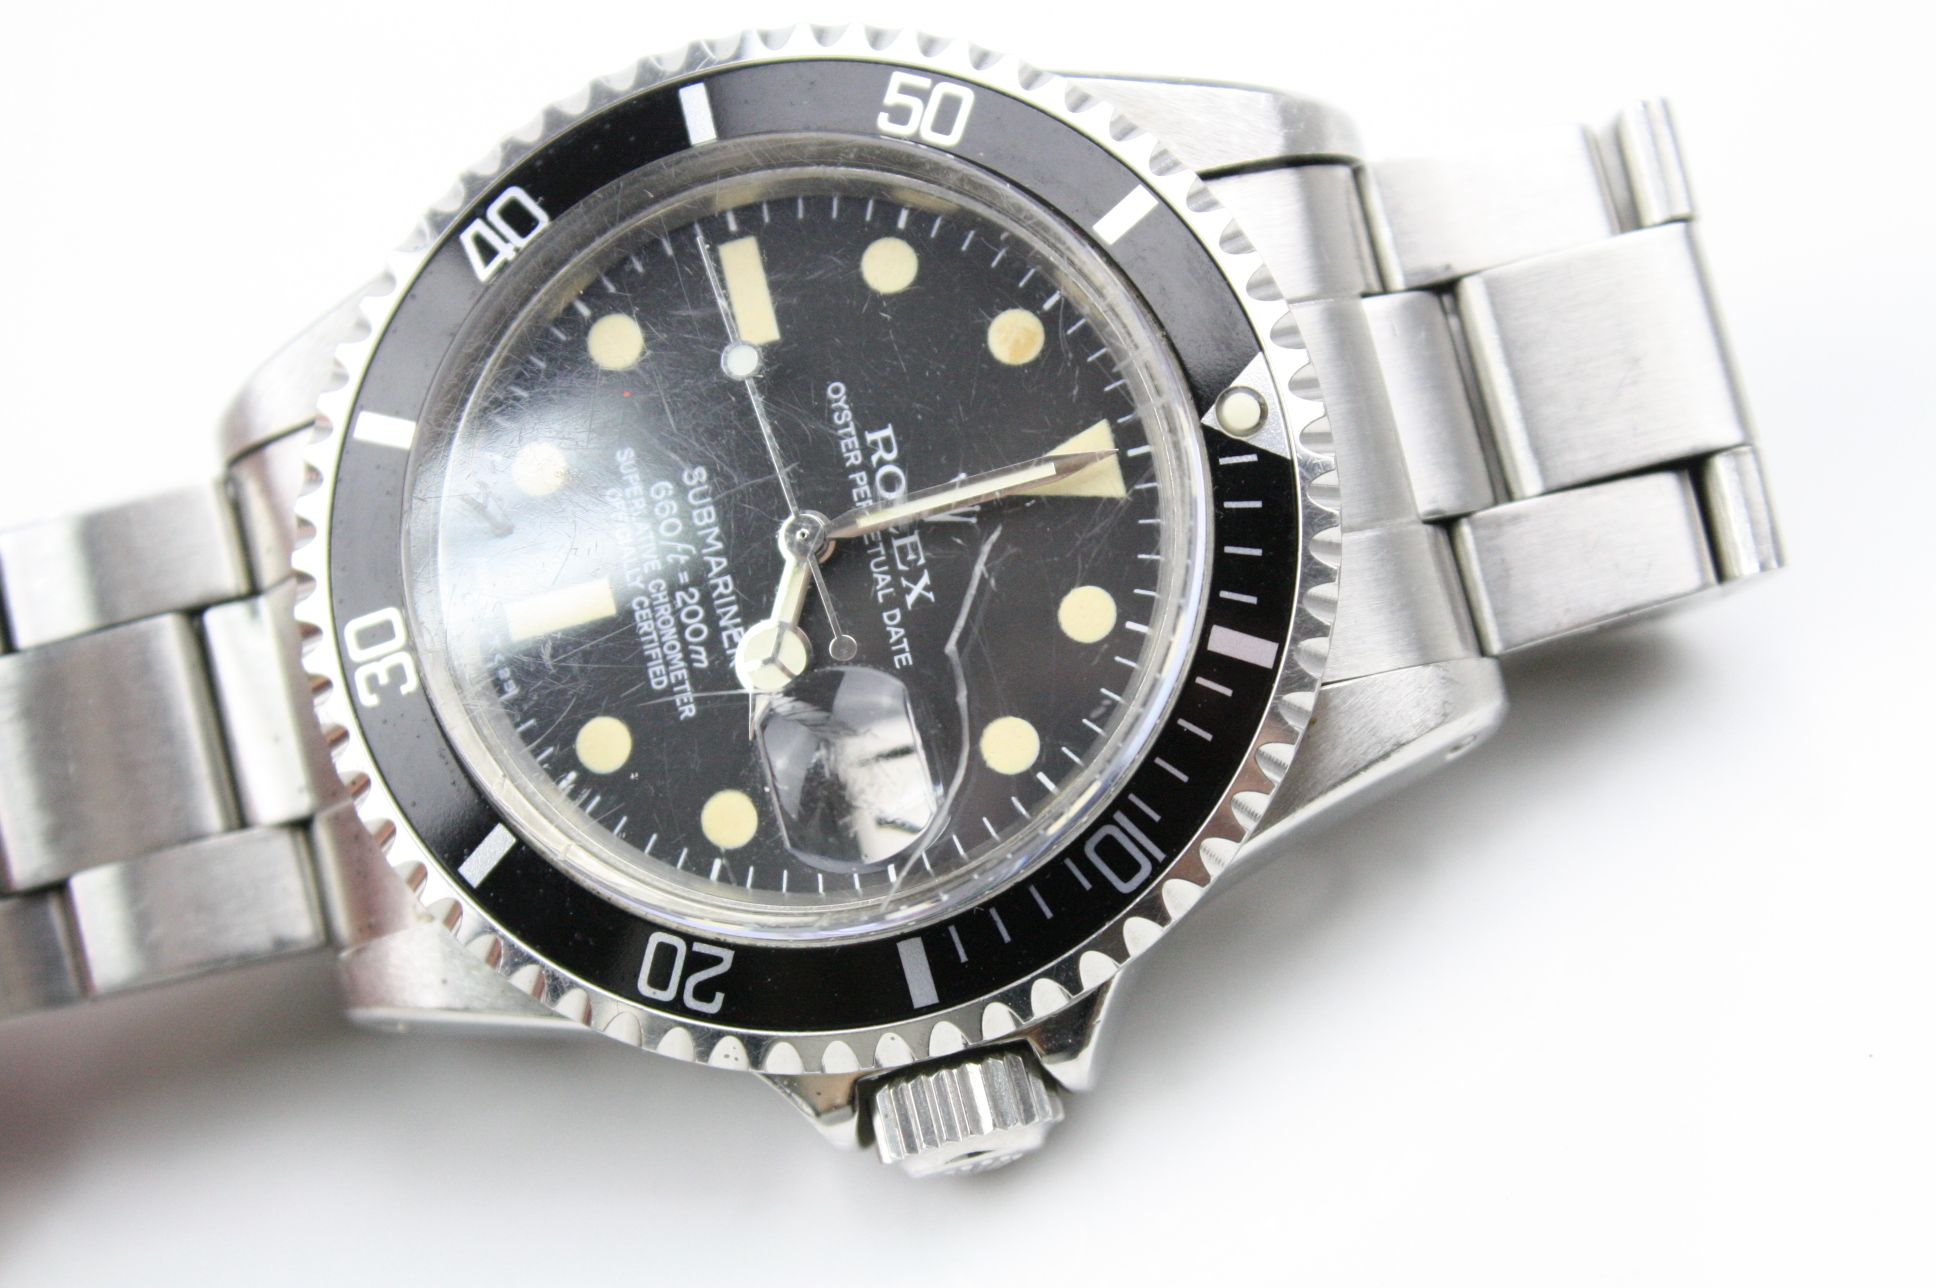 Rolex Oyster Perpetual Date Submariner stainless steel gentleman's watch, ref 1680 - Image 8 of 19